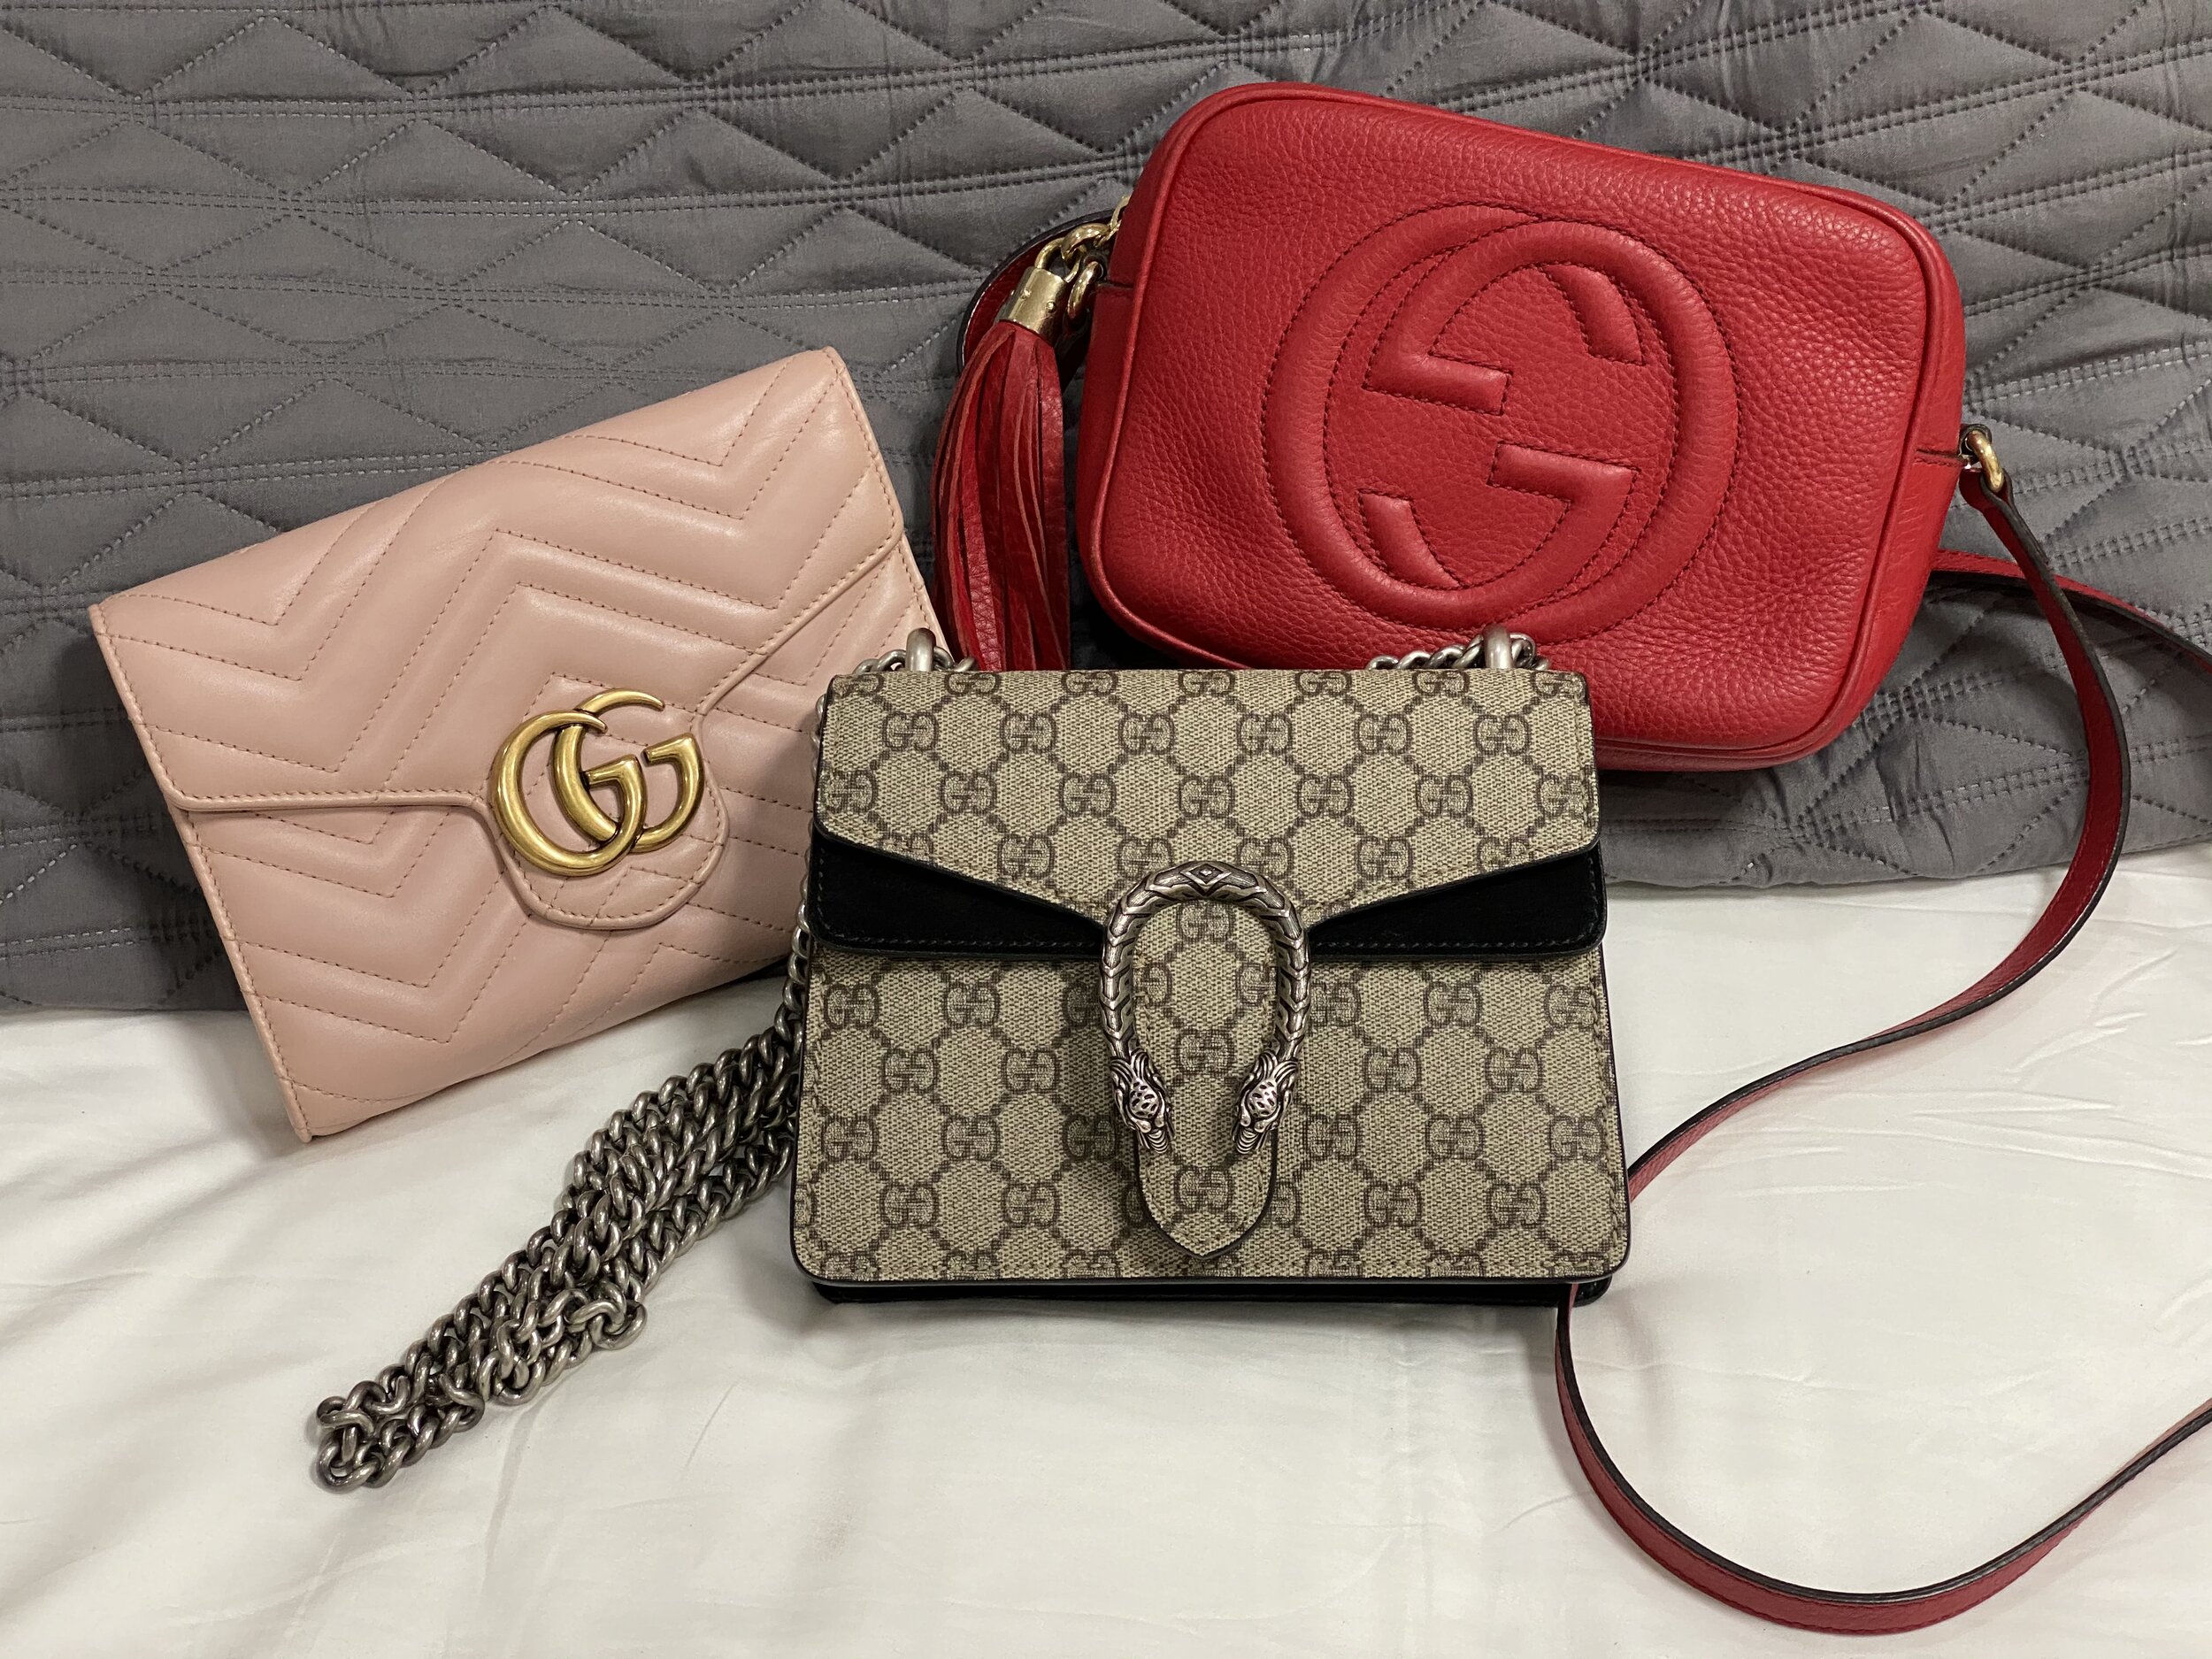 My Gucci Collection — imbaghappy